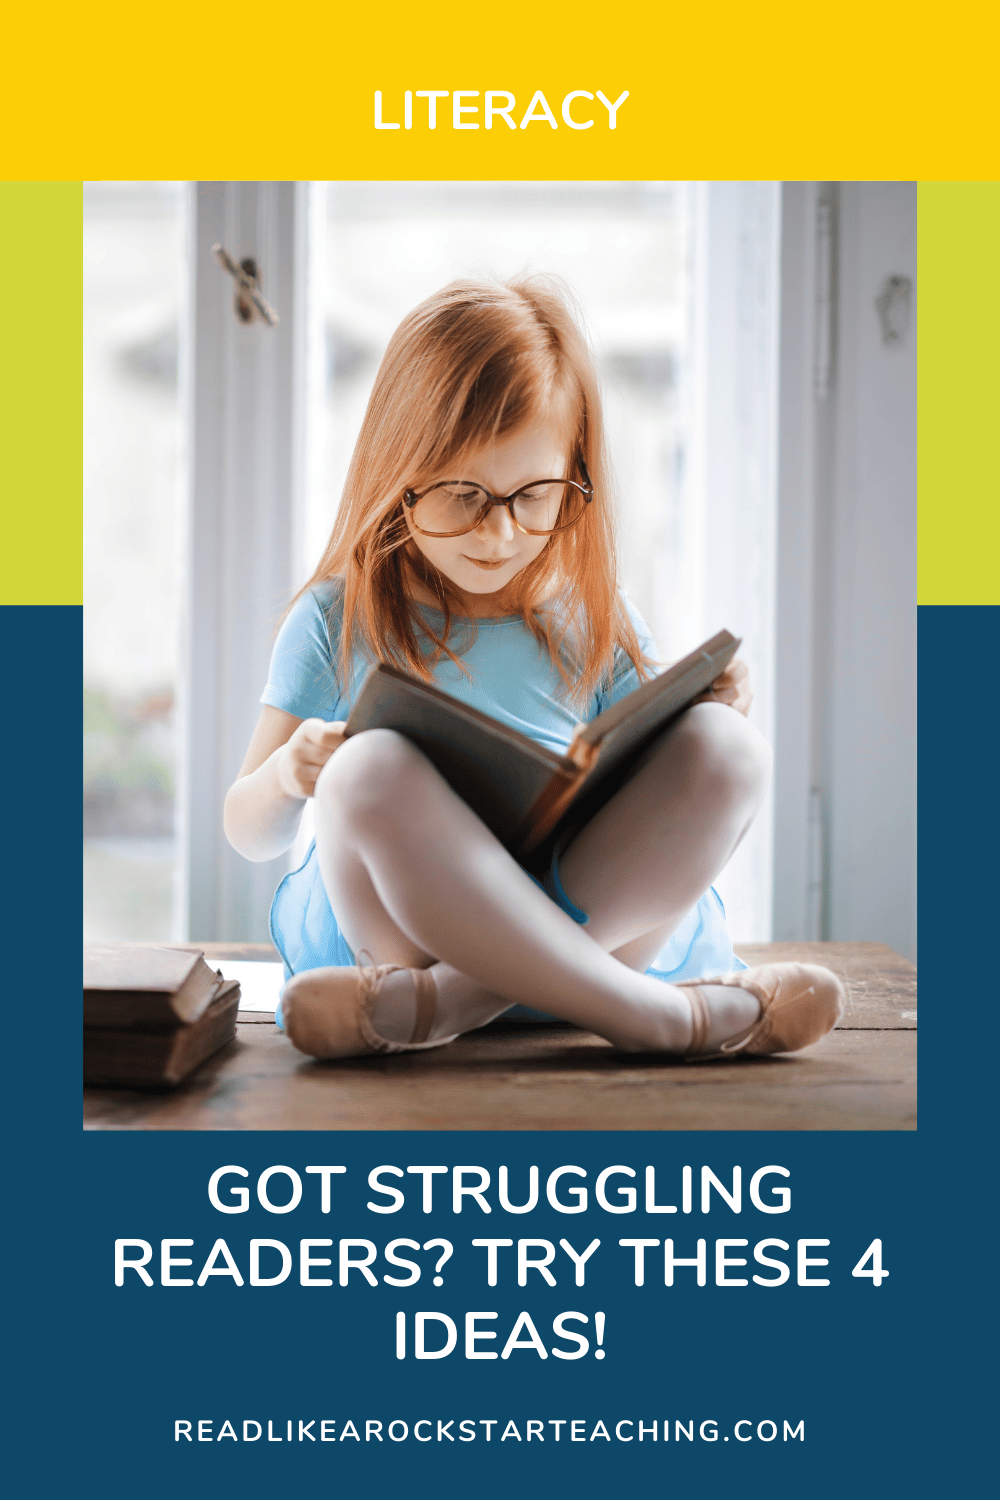 Got Struggling Readers? Try These 4 Ideas!